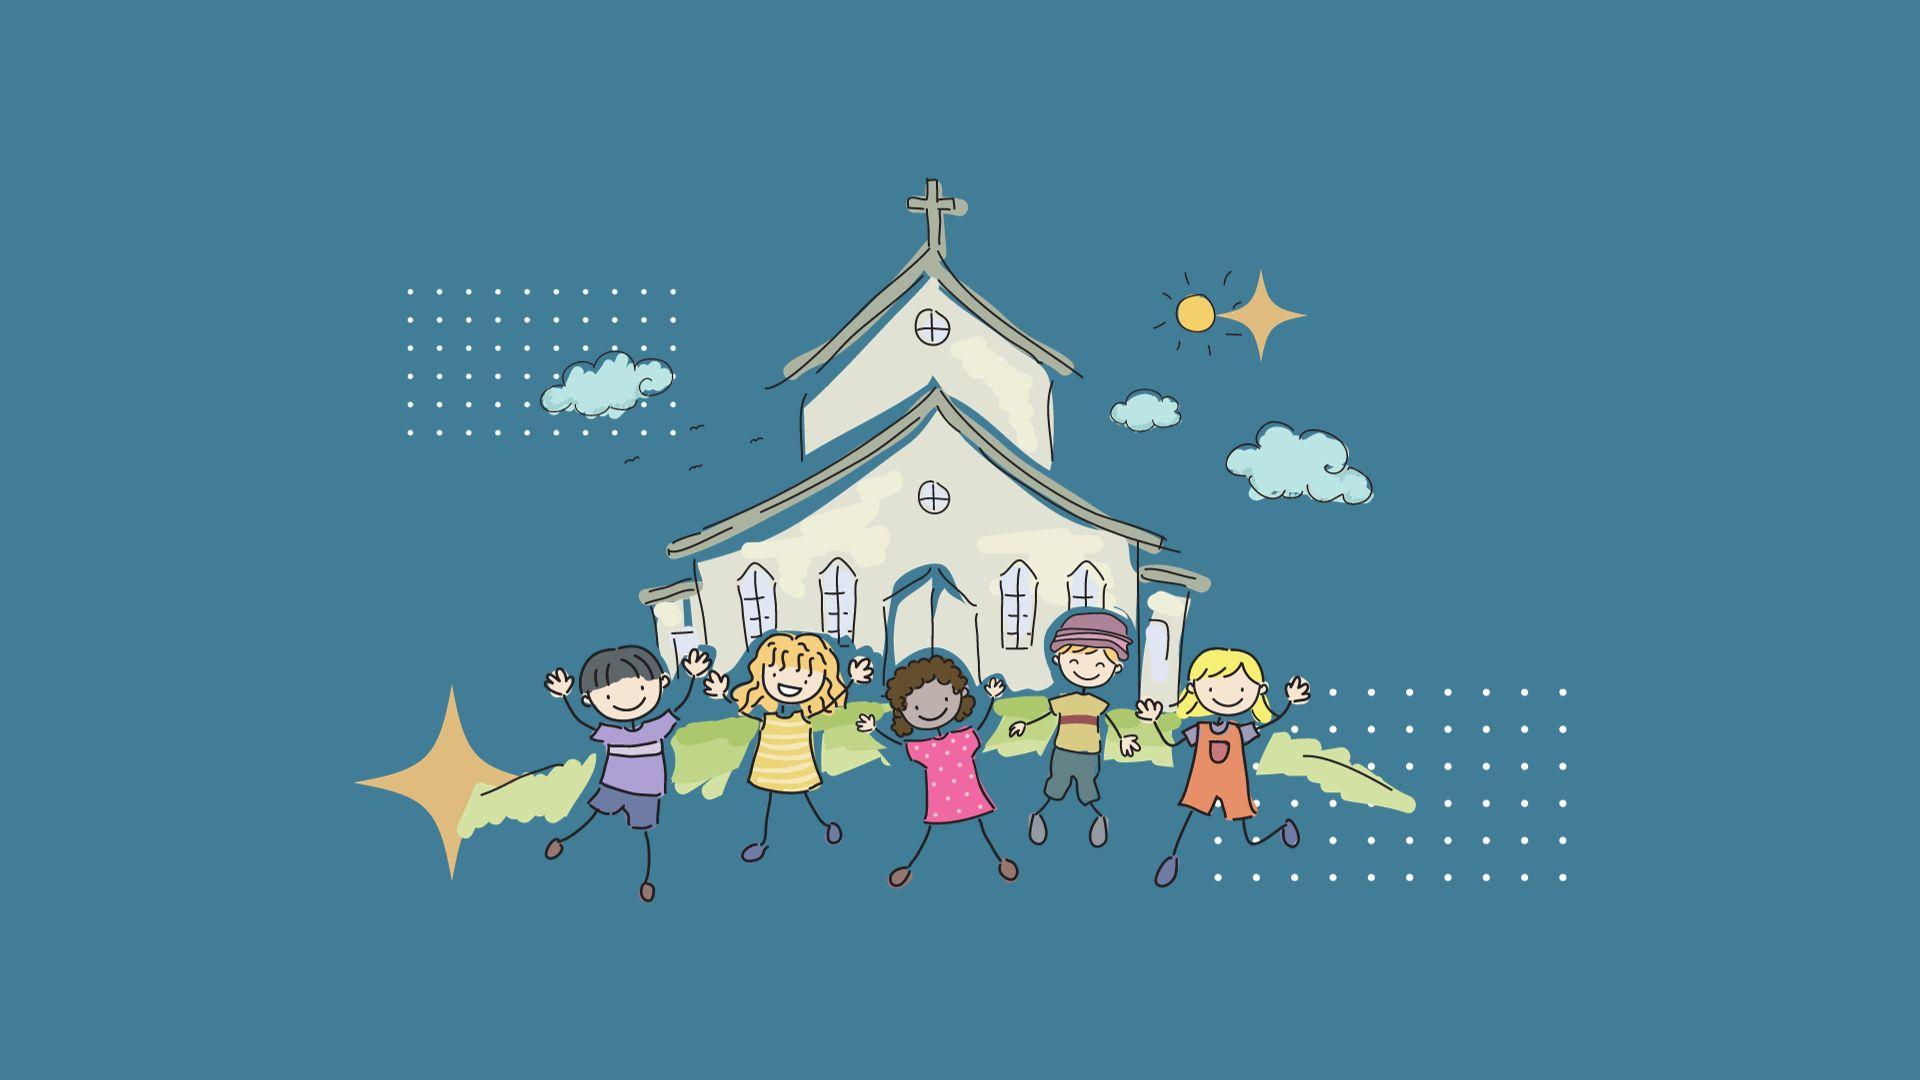 Cartoon sketch of a church building with kids smiling in front